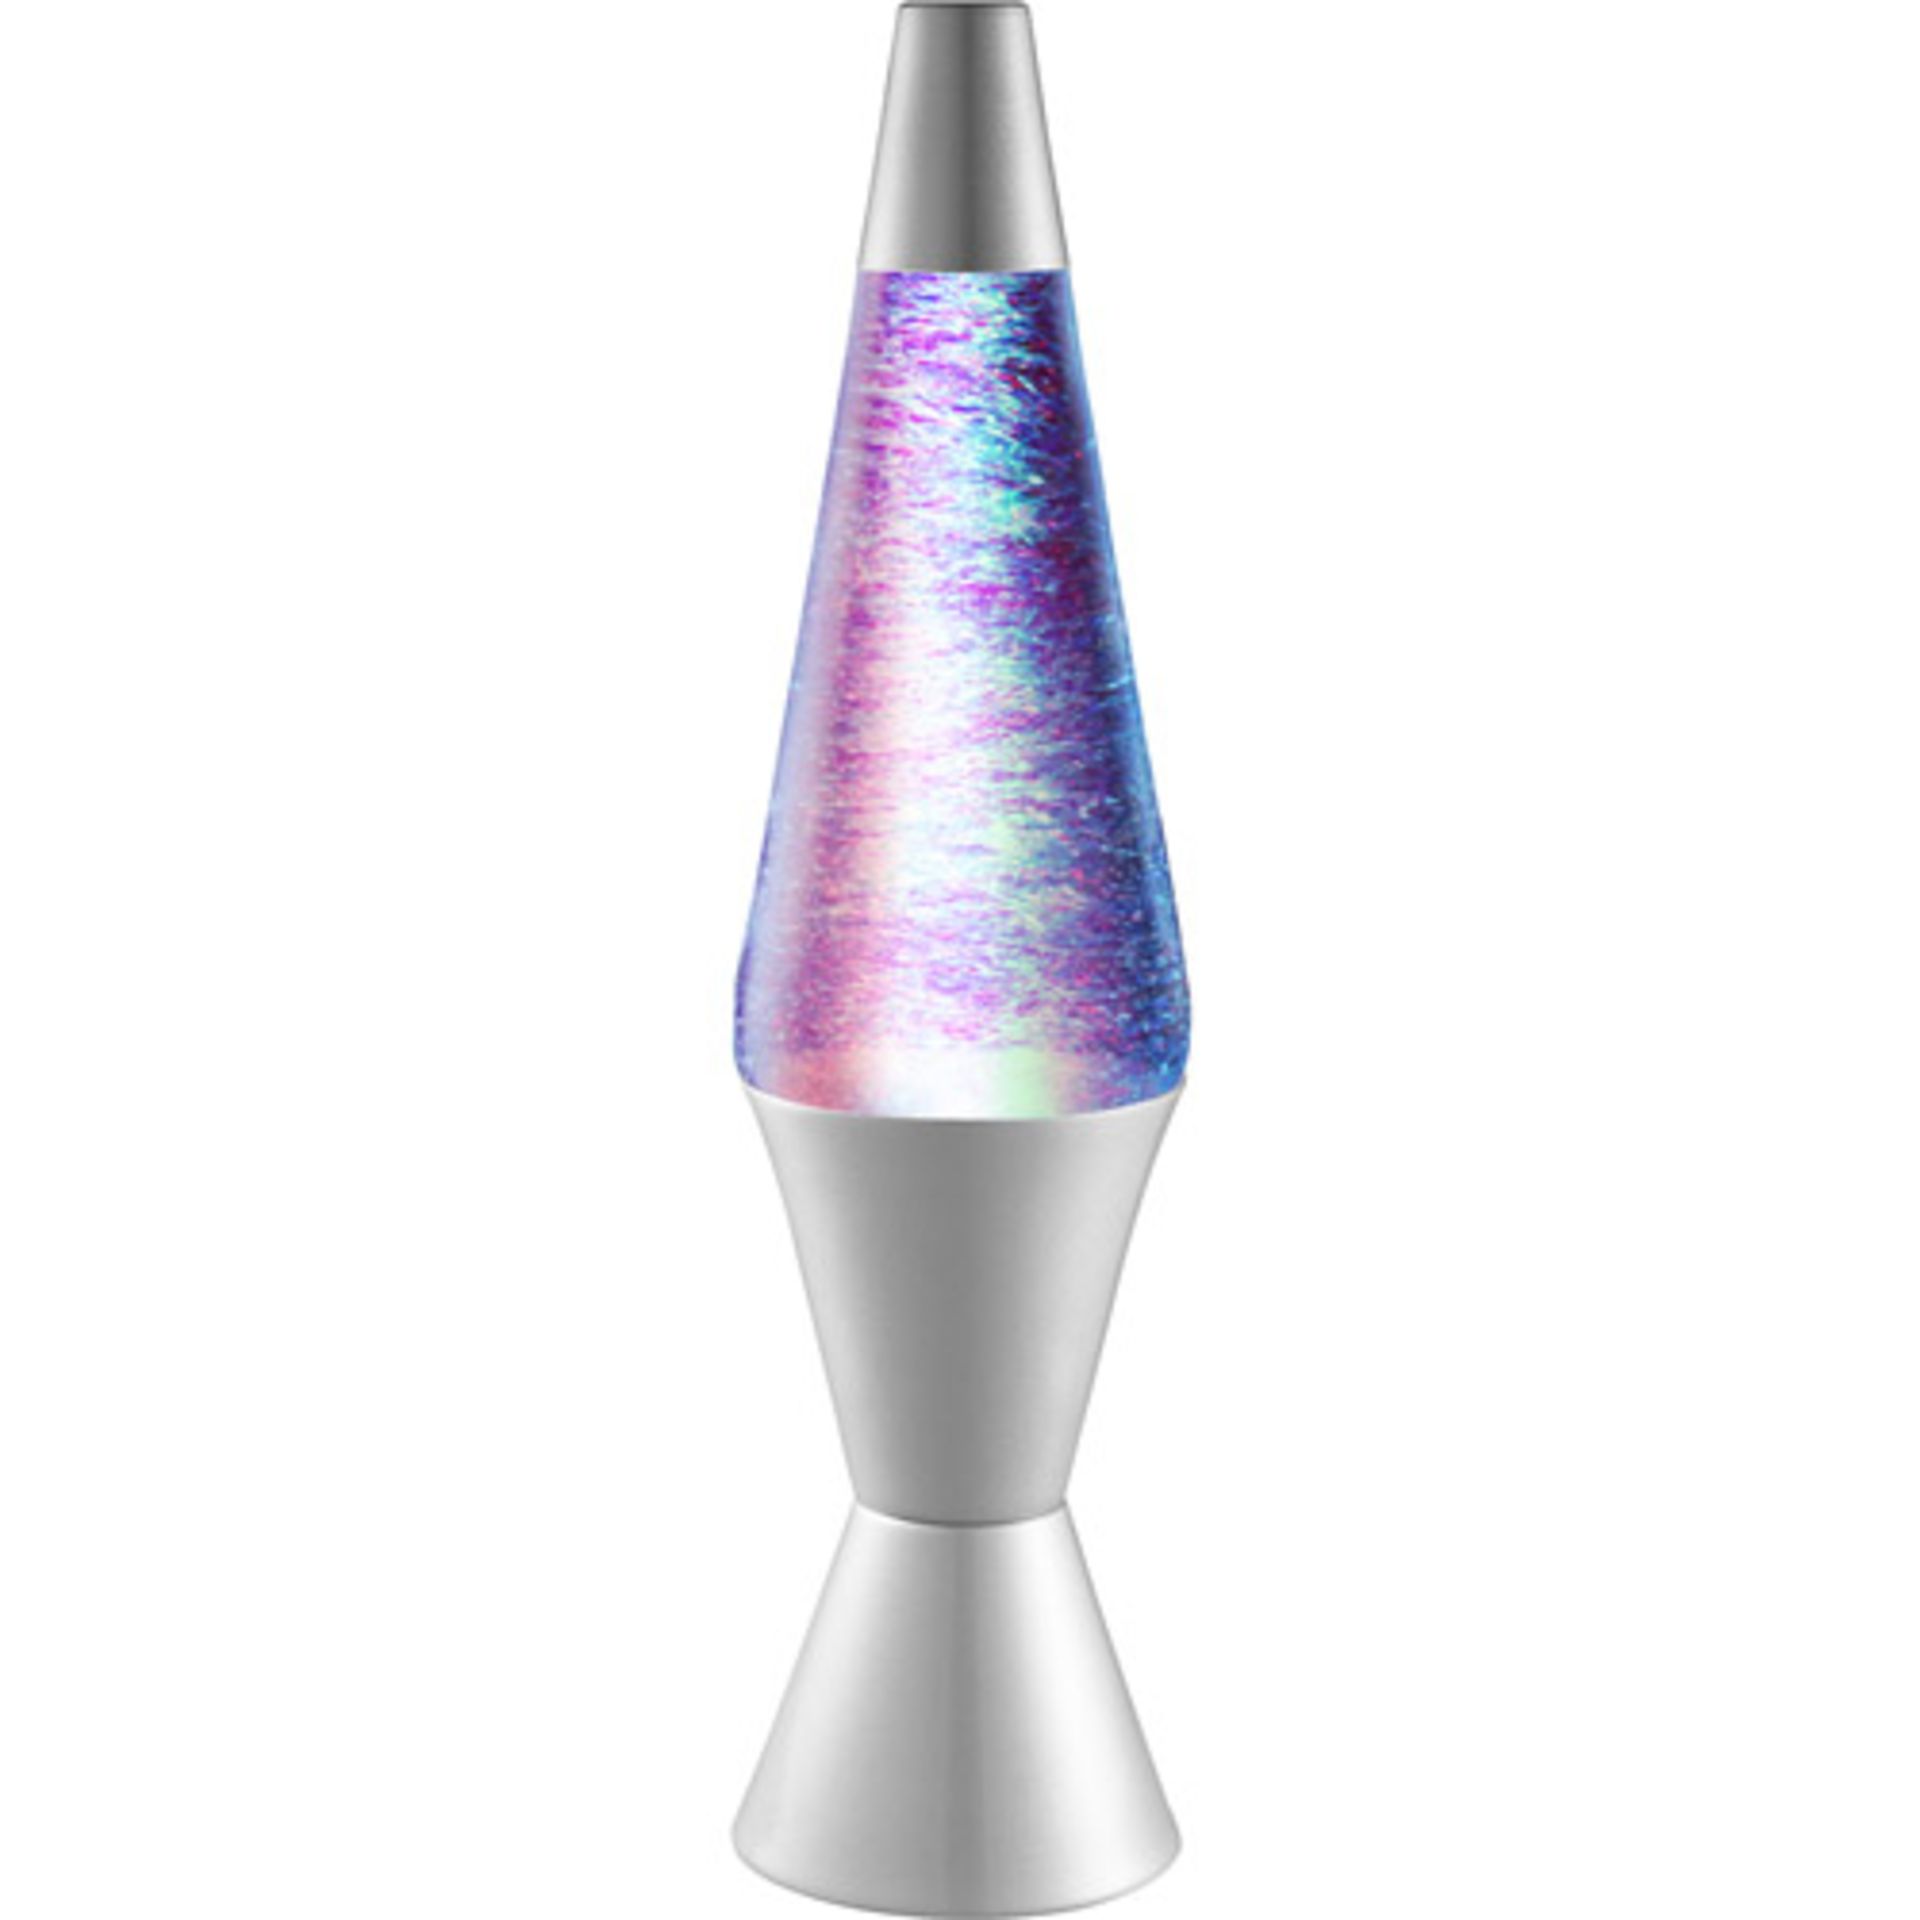 V *TRADE QTY* Brand New Vortex Lava Lamp - 14.5" Tall - Swirling Glitter Action - 3 Colour Phasing